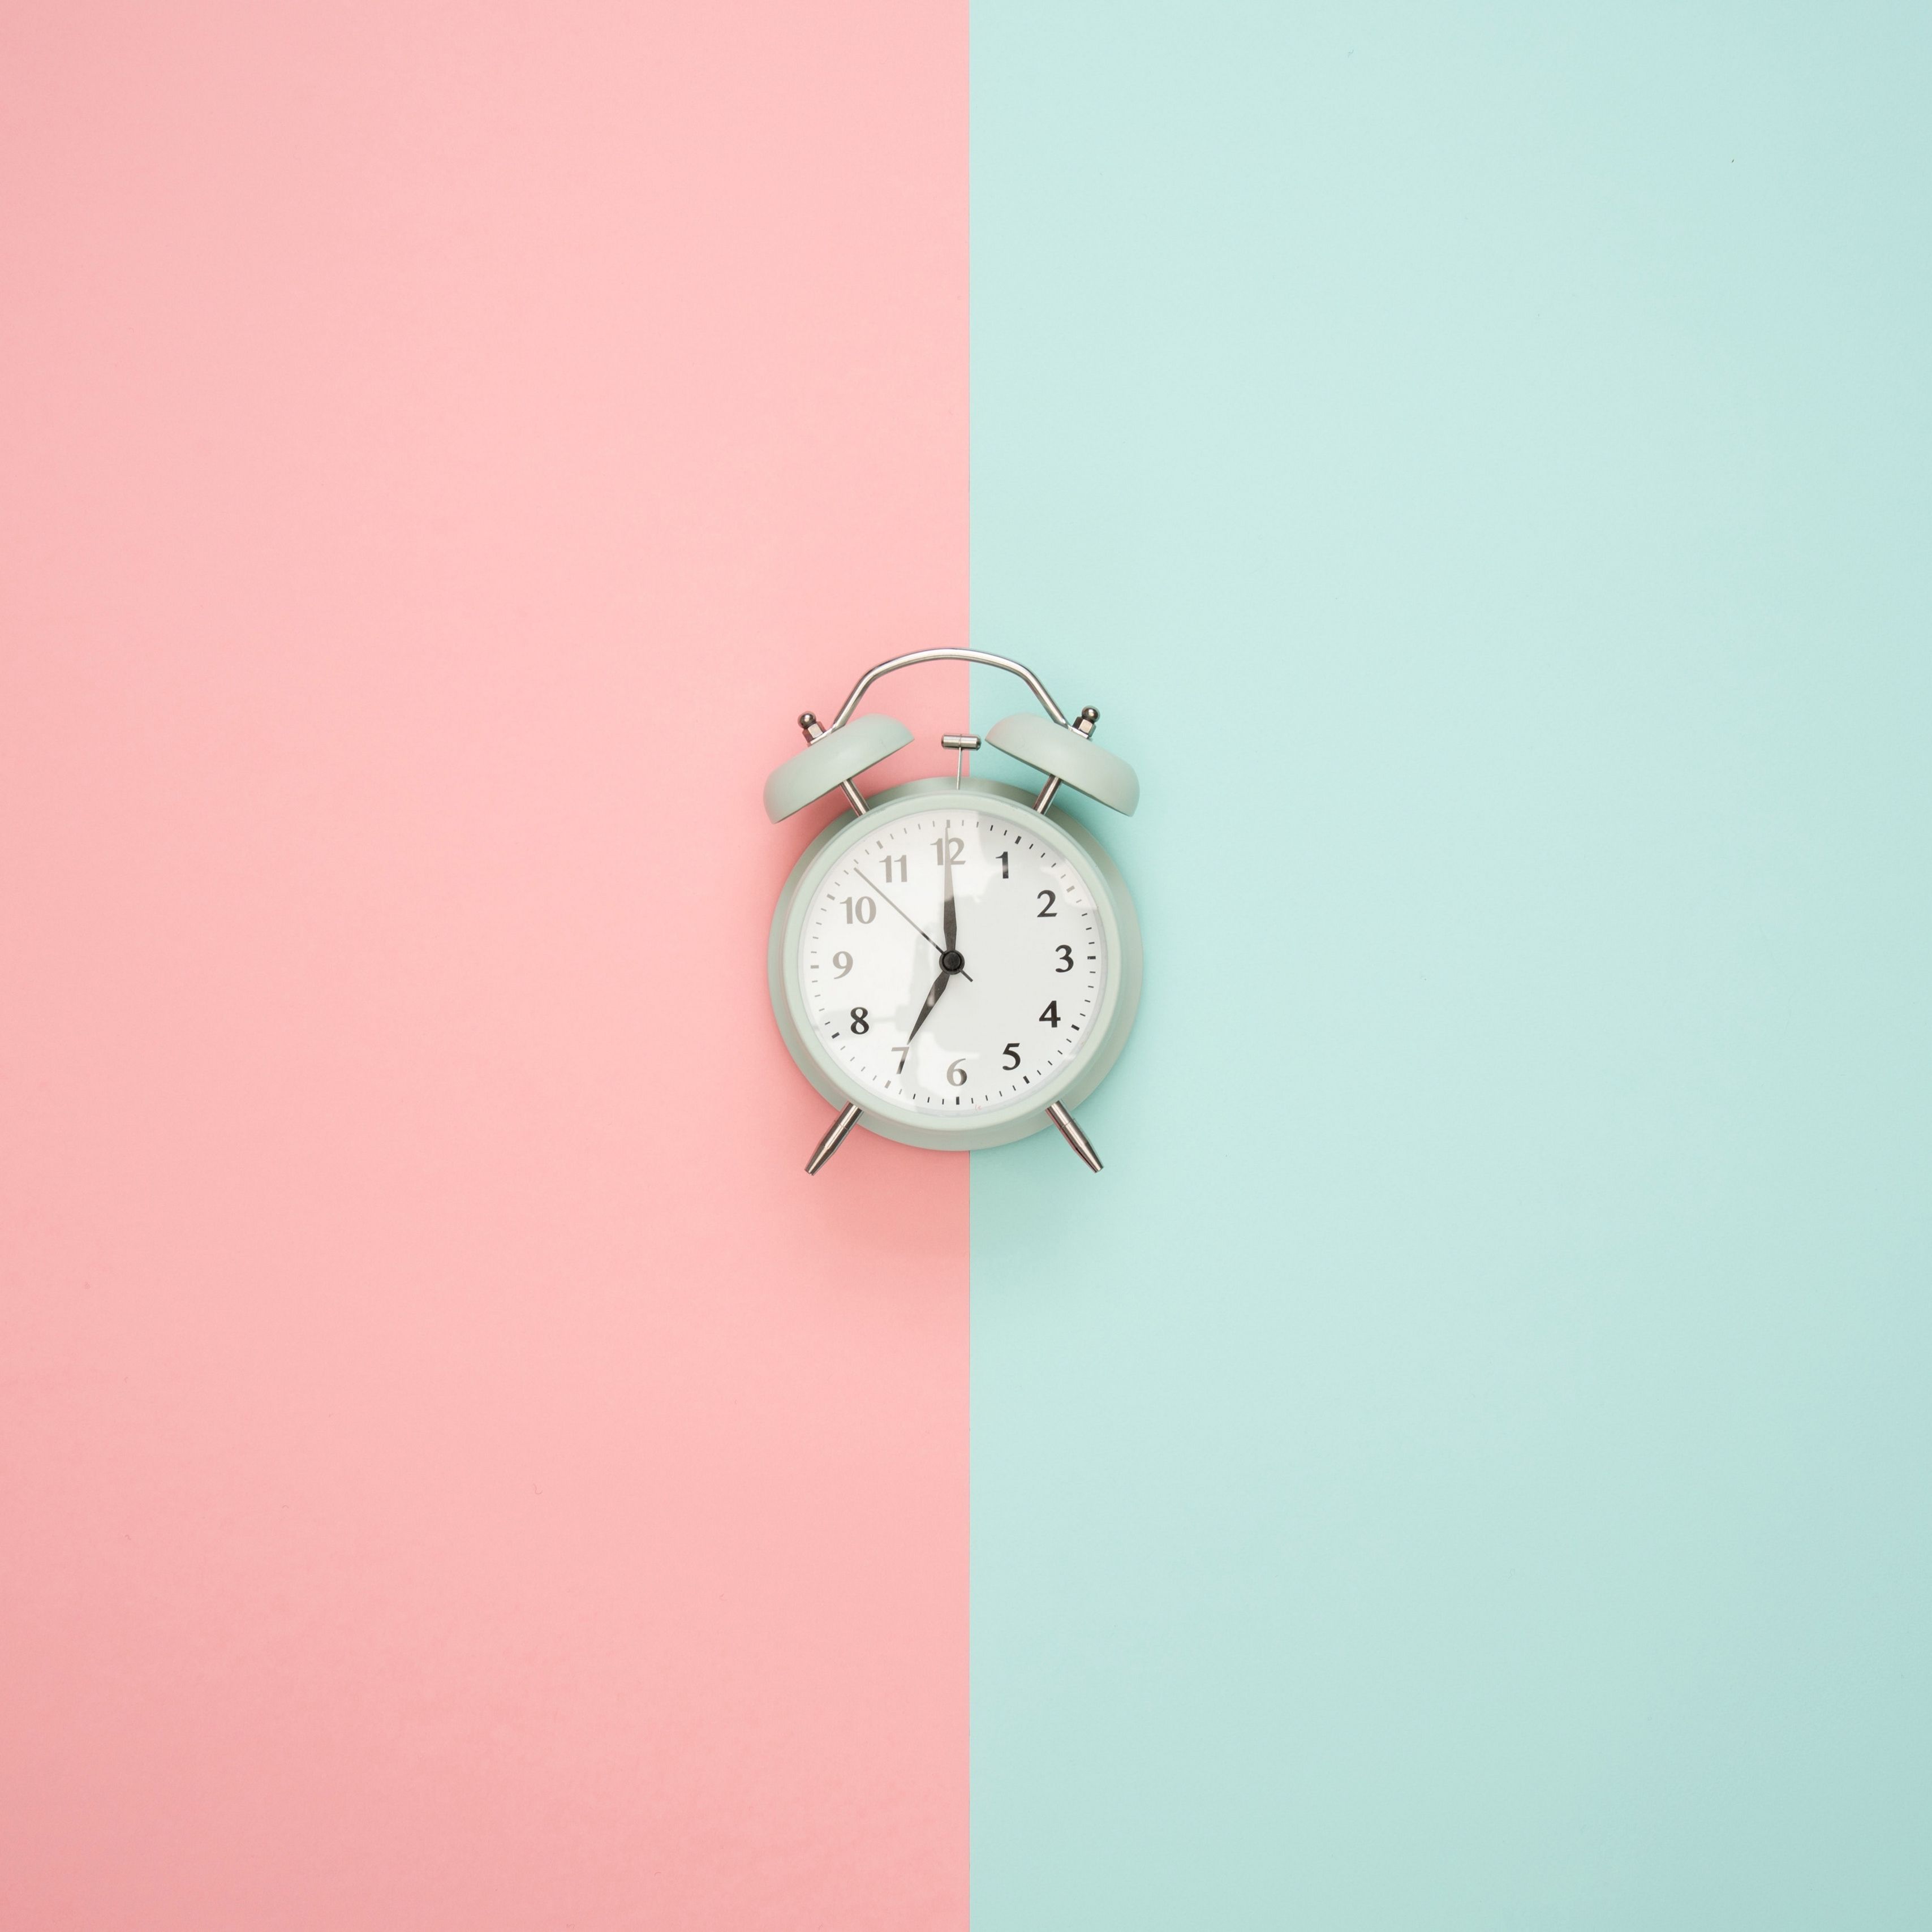 A clock on a pink and blue background - Pastel minimalist